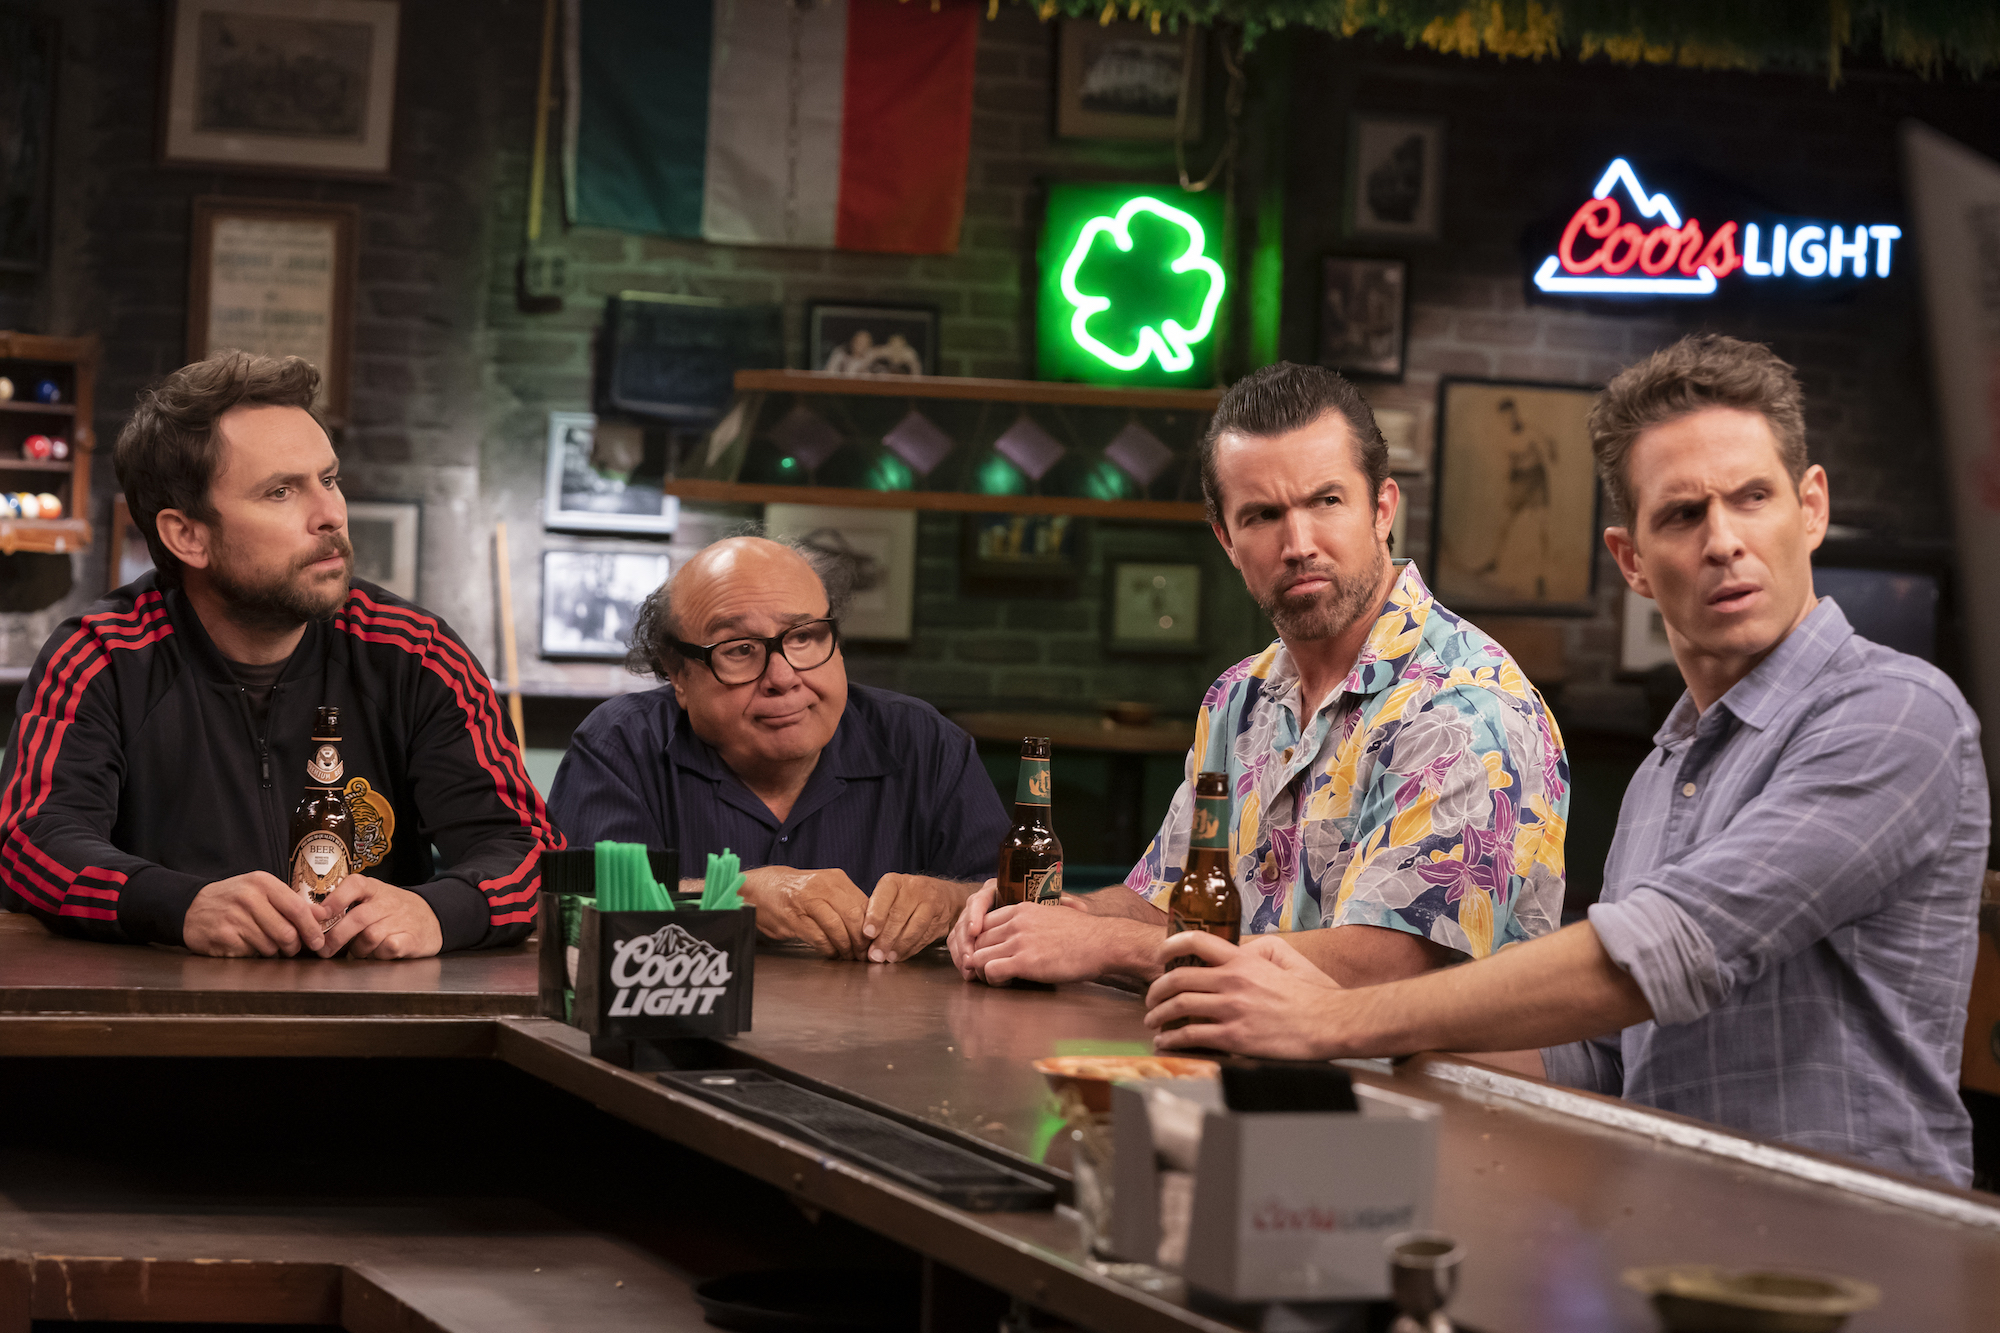 'It's Always Sunny in Philadelphia' Season 15 production still of Charlie Day, Danny DeVito, Rob McElhenney, and Glen Howerton sitting at a bar while looking confused.